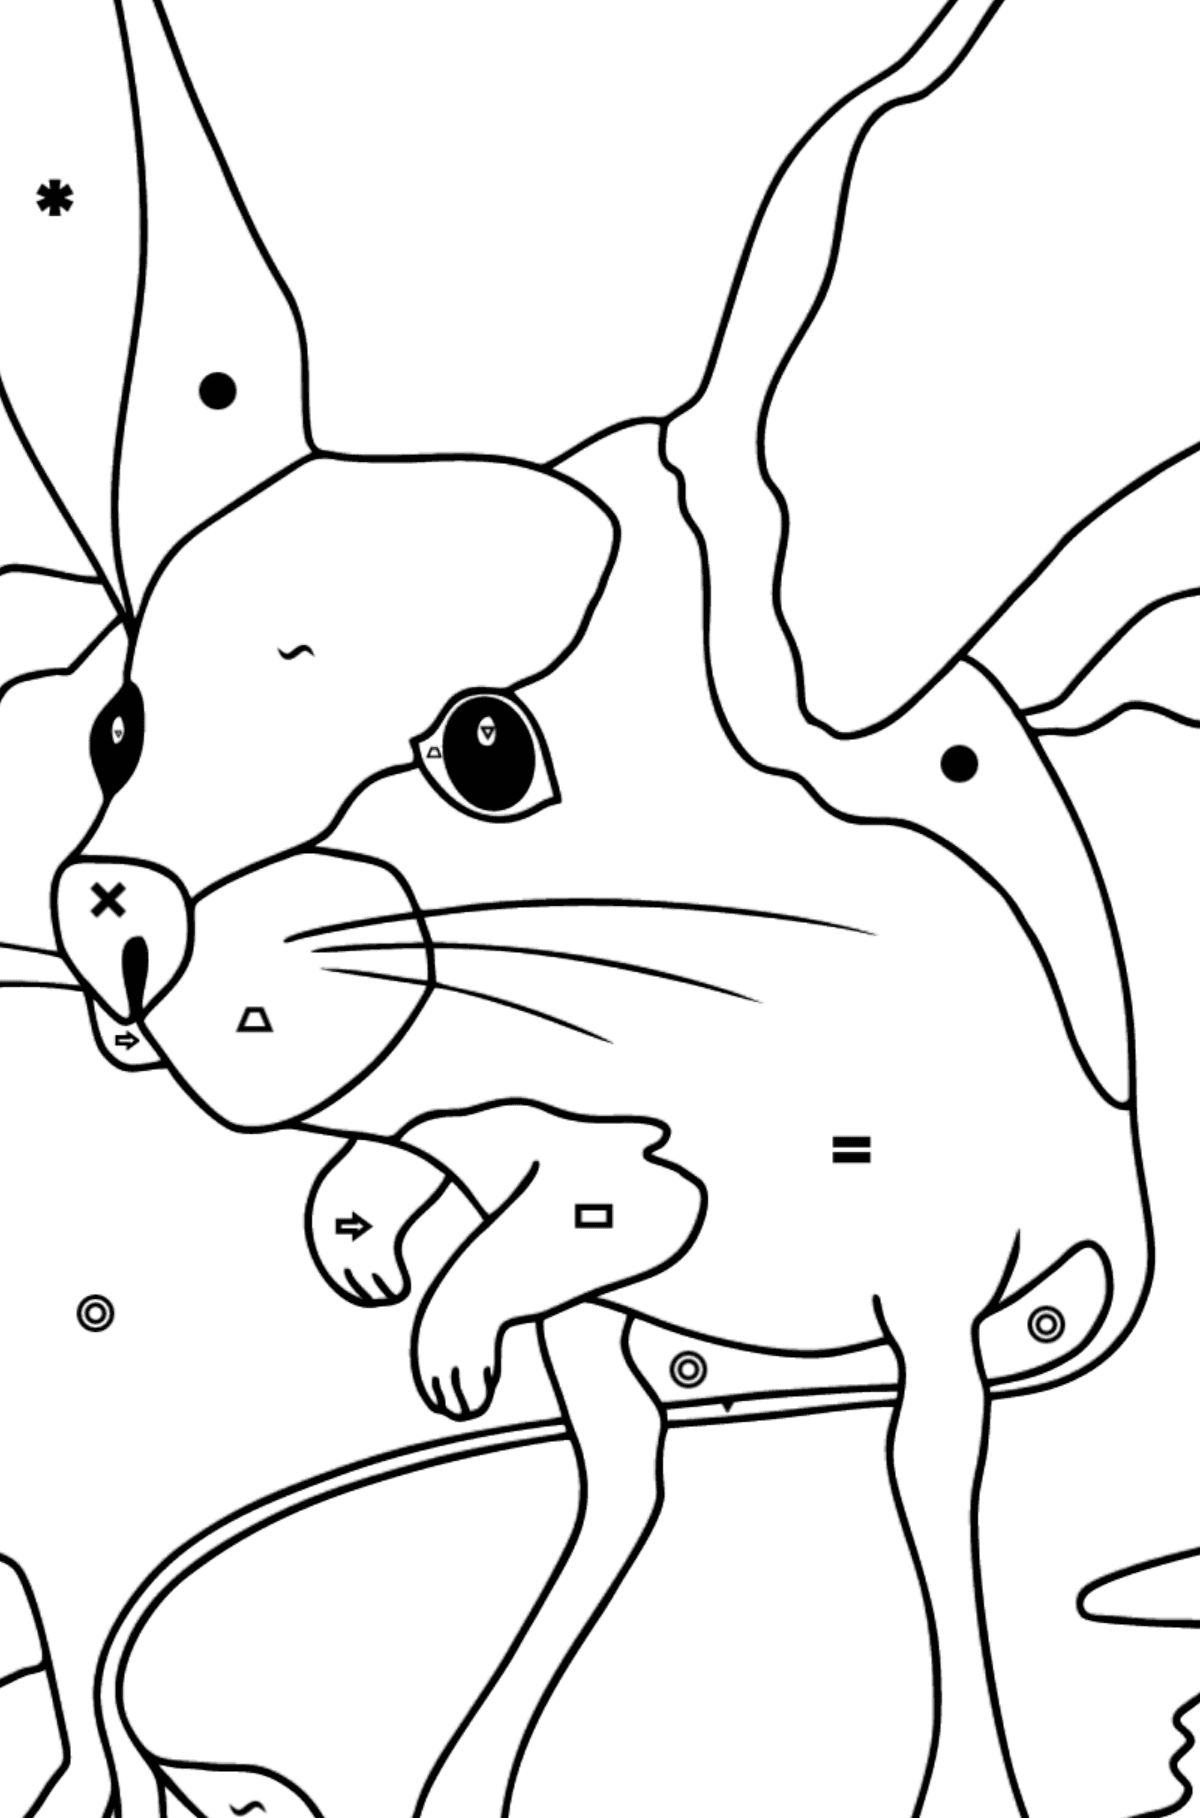 A Jerboa is Inspecting the Area Coloring Page - Coloring by Symbols and Geometric Shapes for Kids